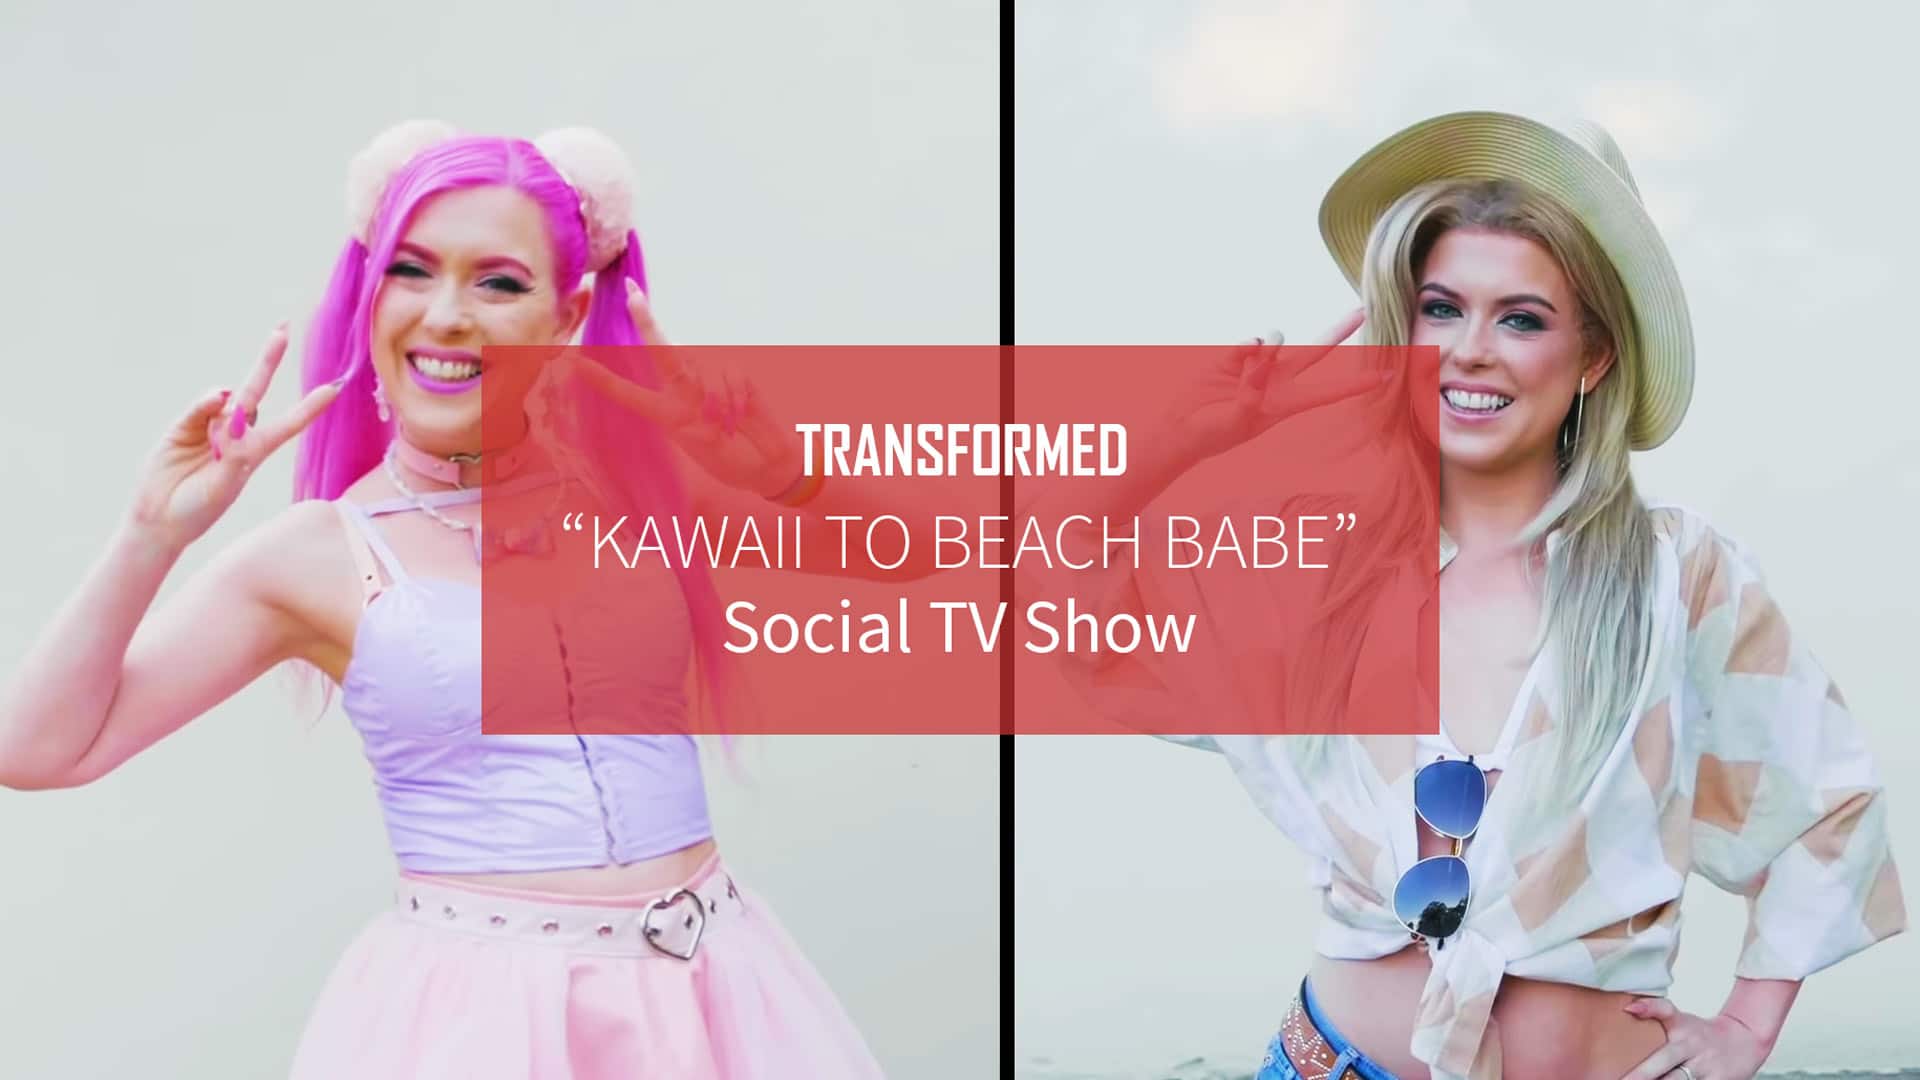 TV Content Production - Kawaii to Beach Babe - Shot by Recal Media for Truly TV